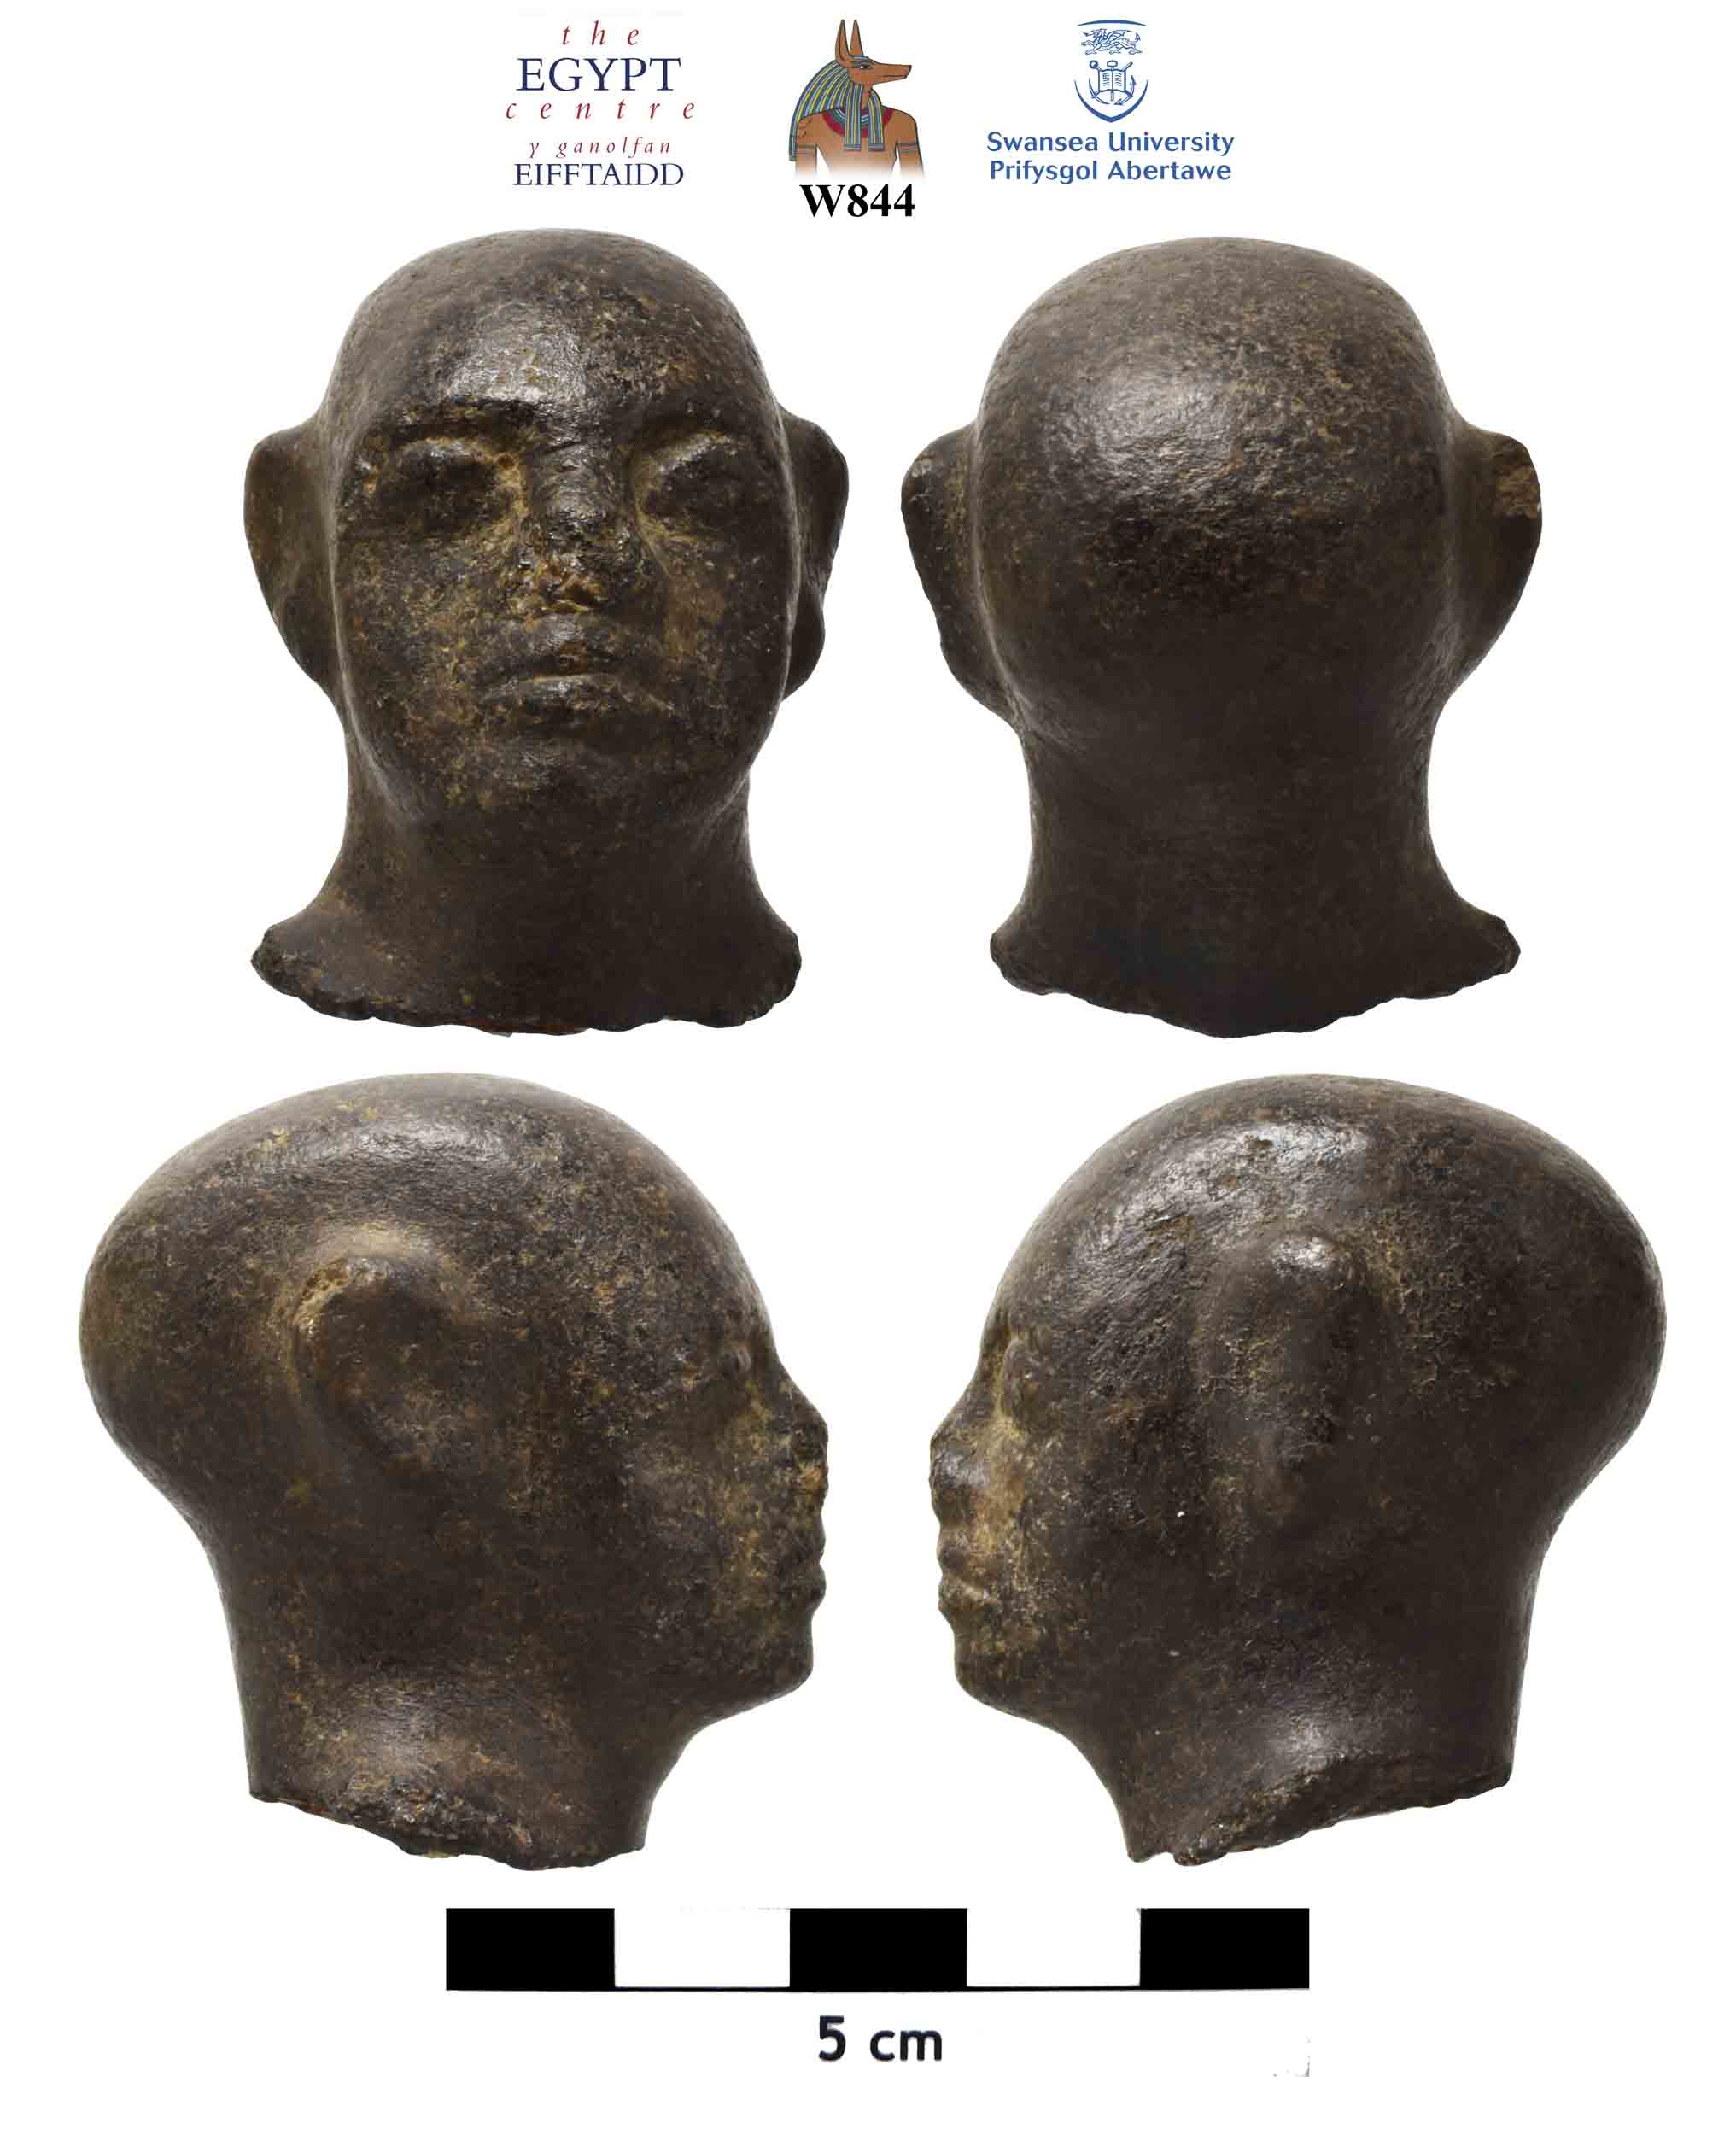 Image for: Head of a statue